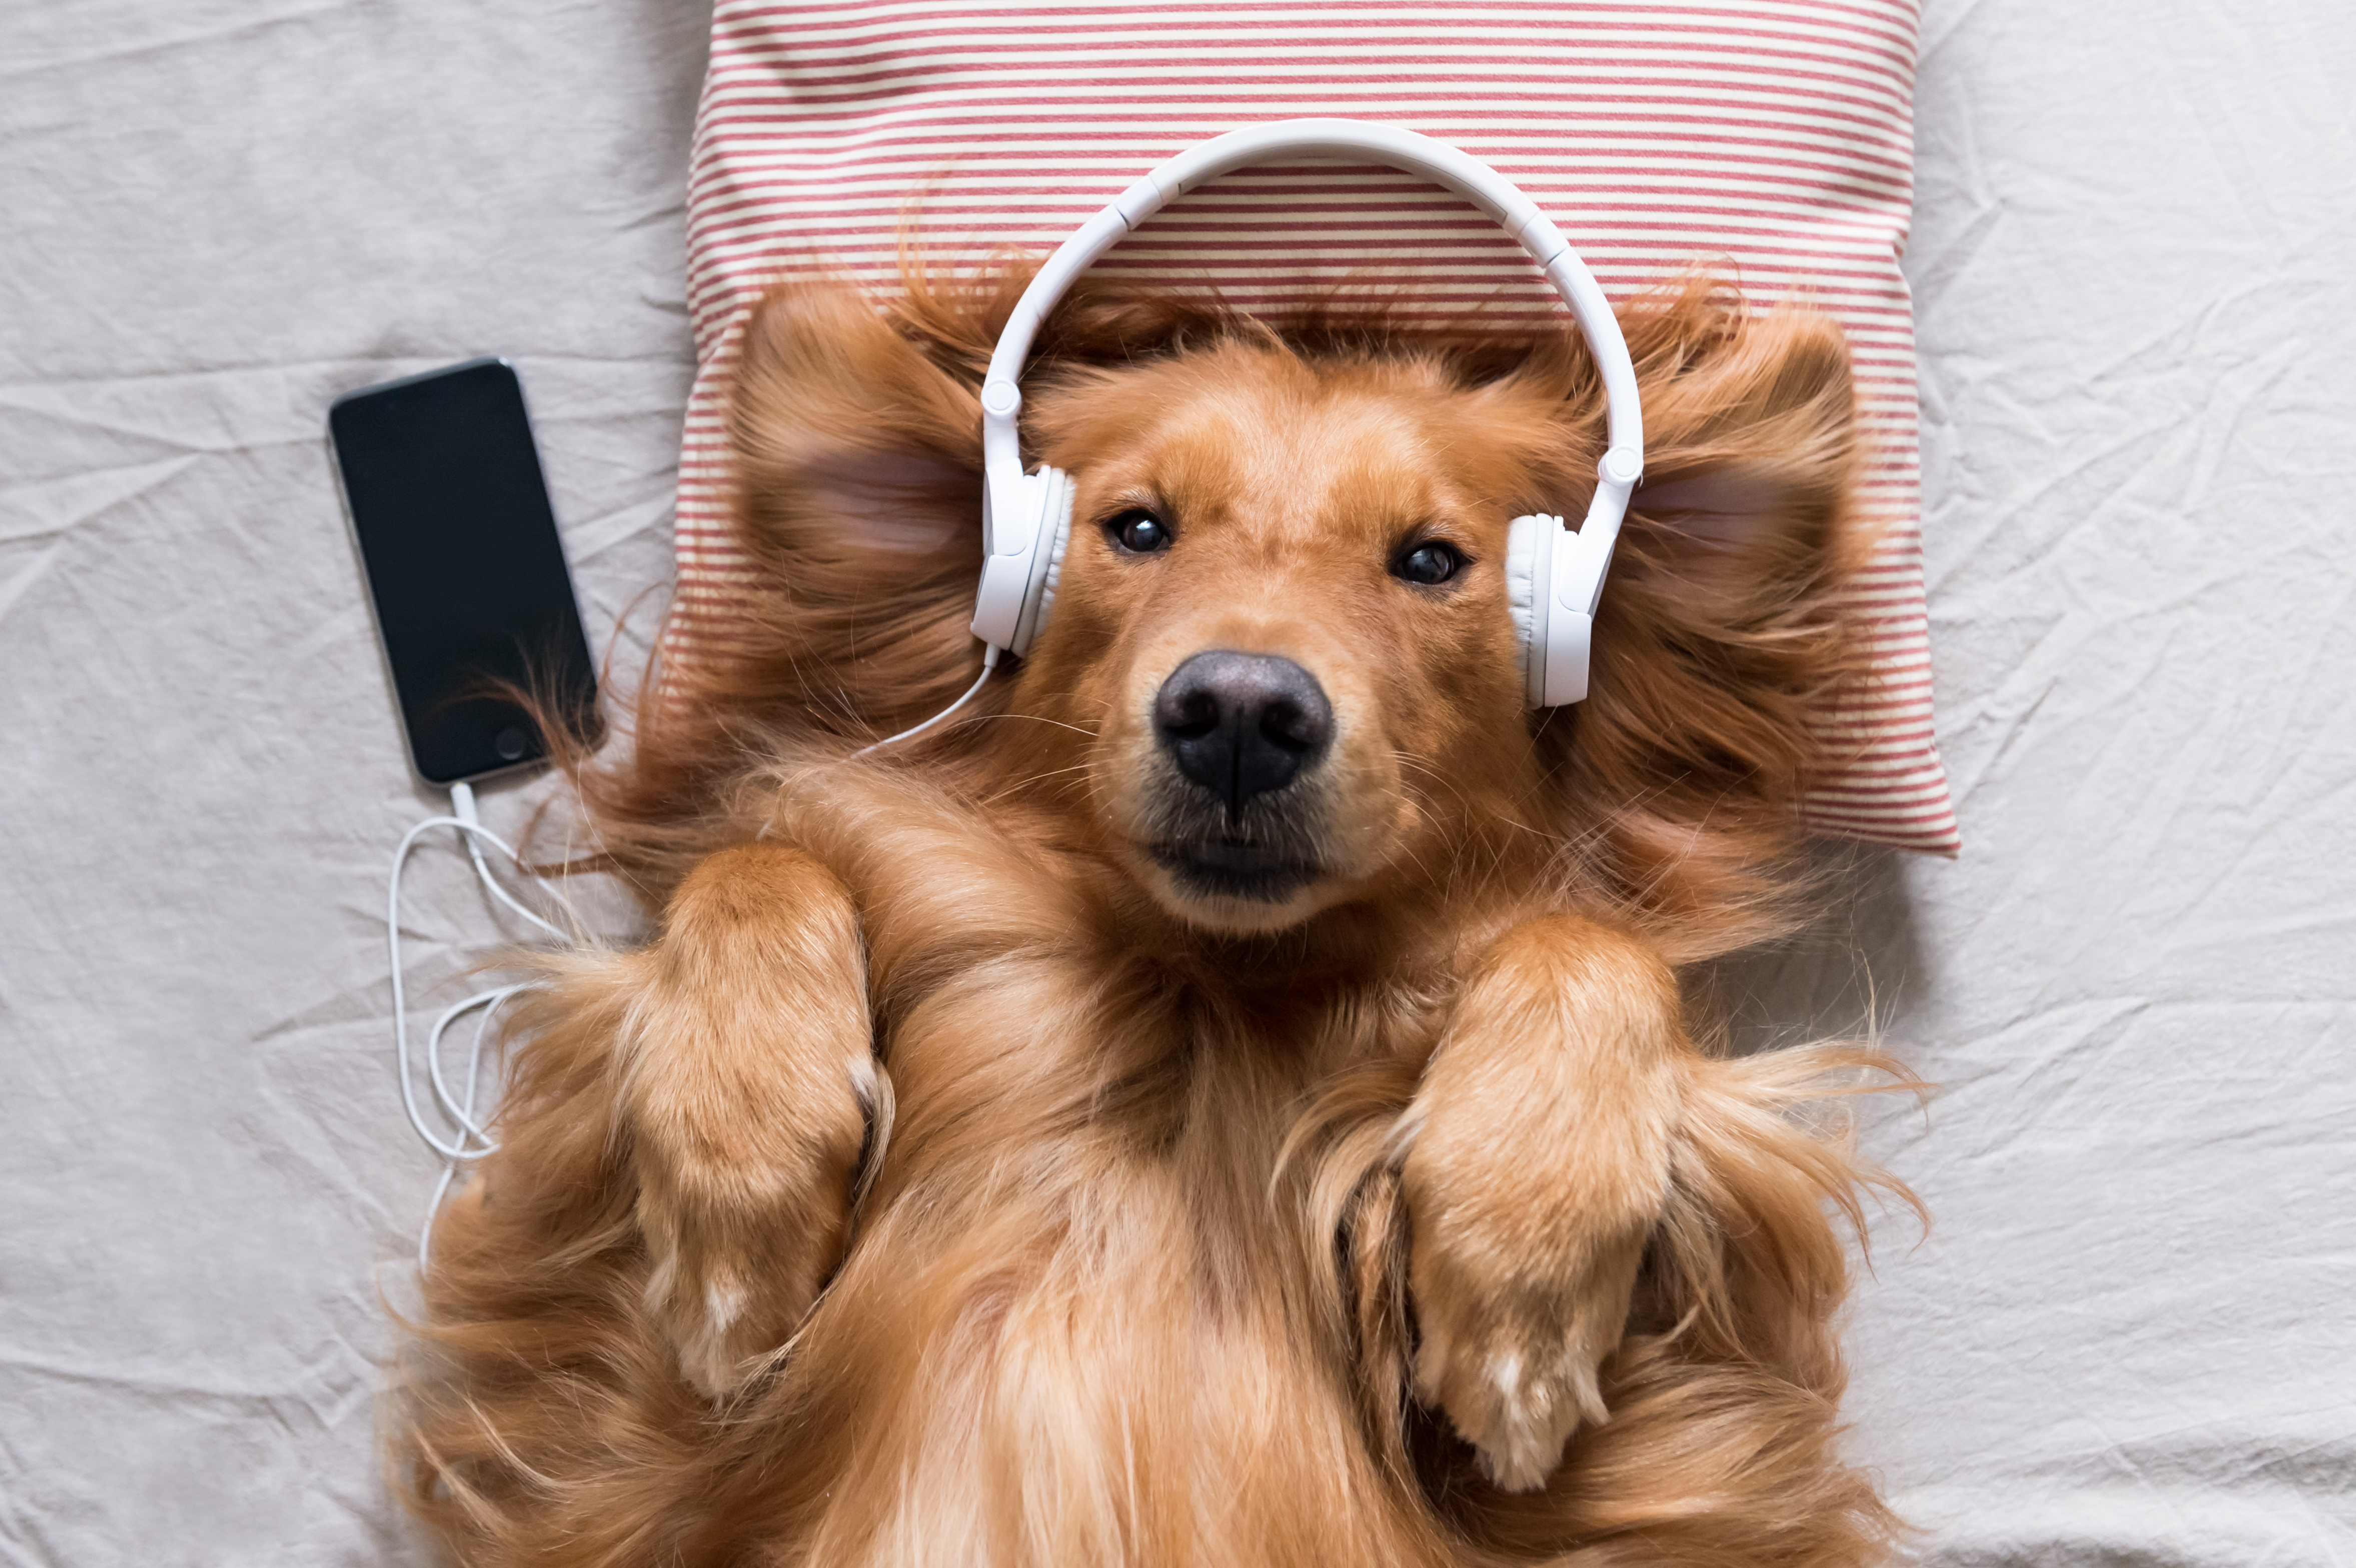 best music for dogs home alone